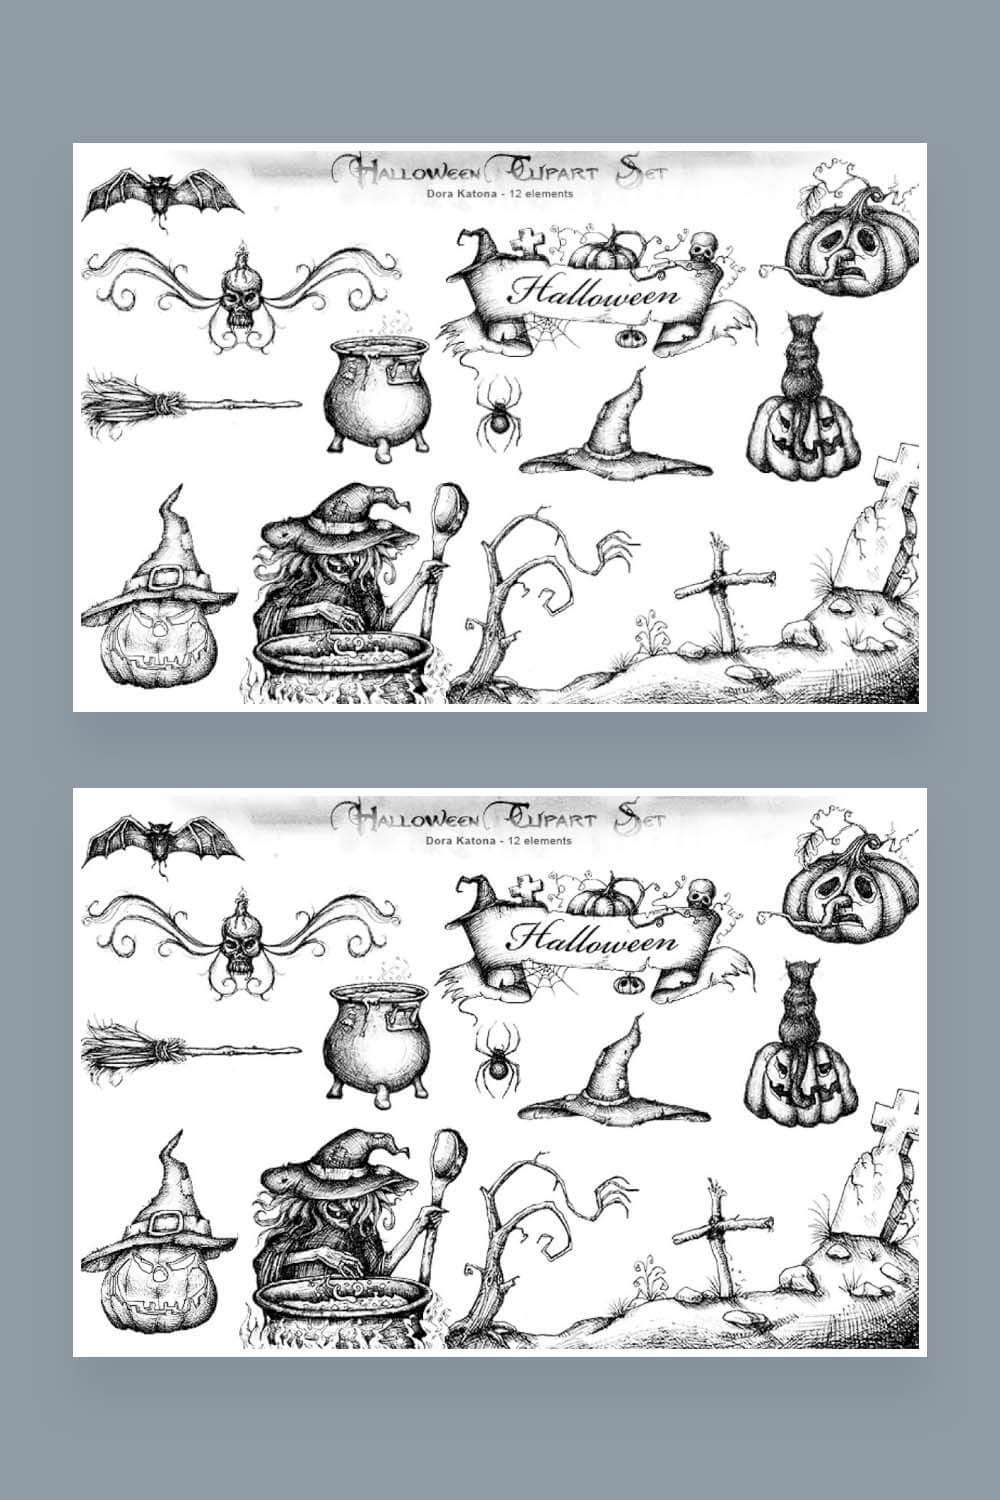 Two pictures from Halloween clipart set - 12 elements.